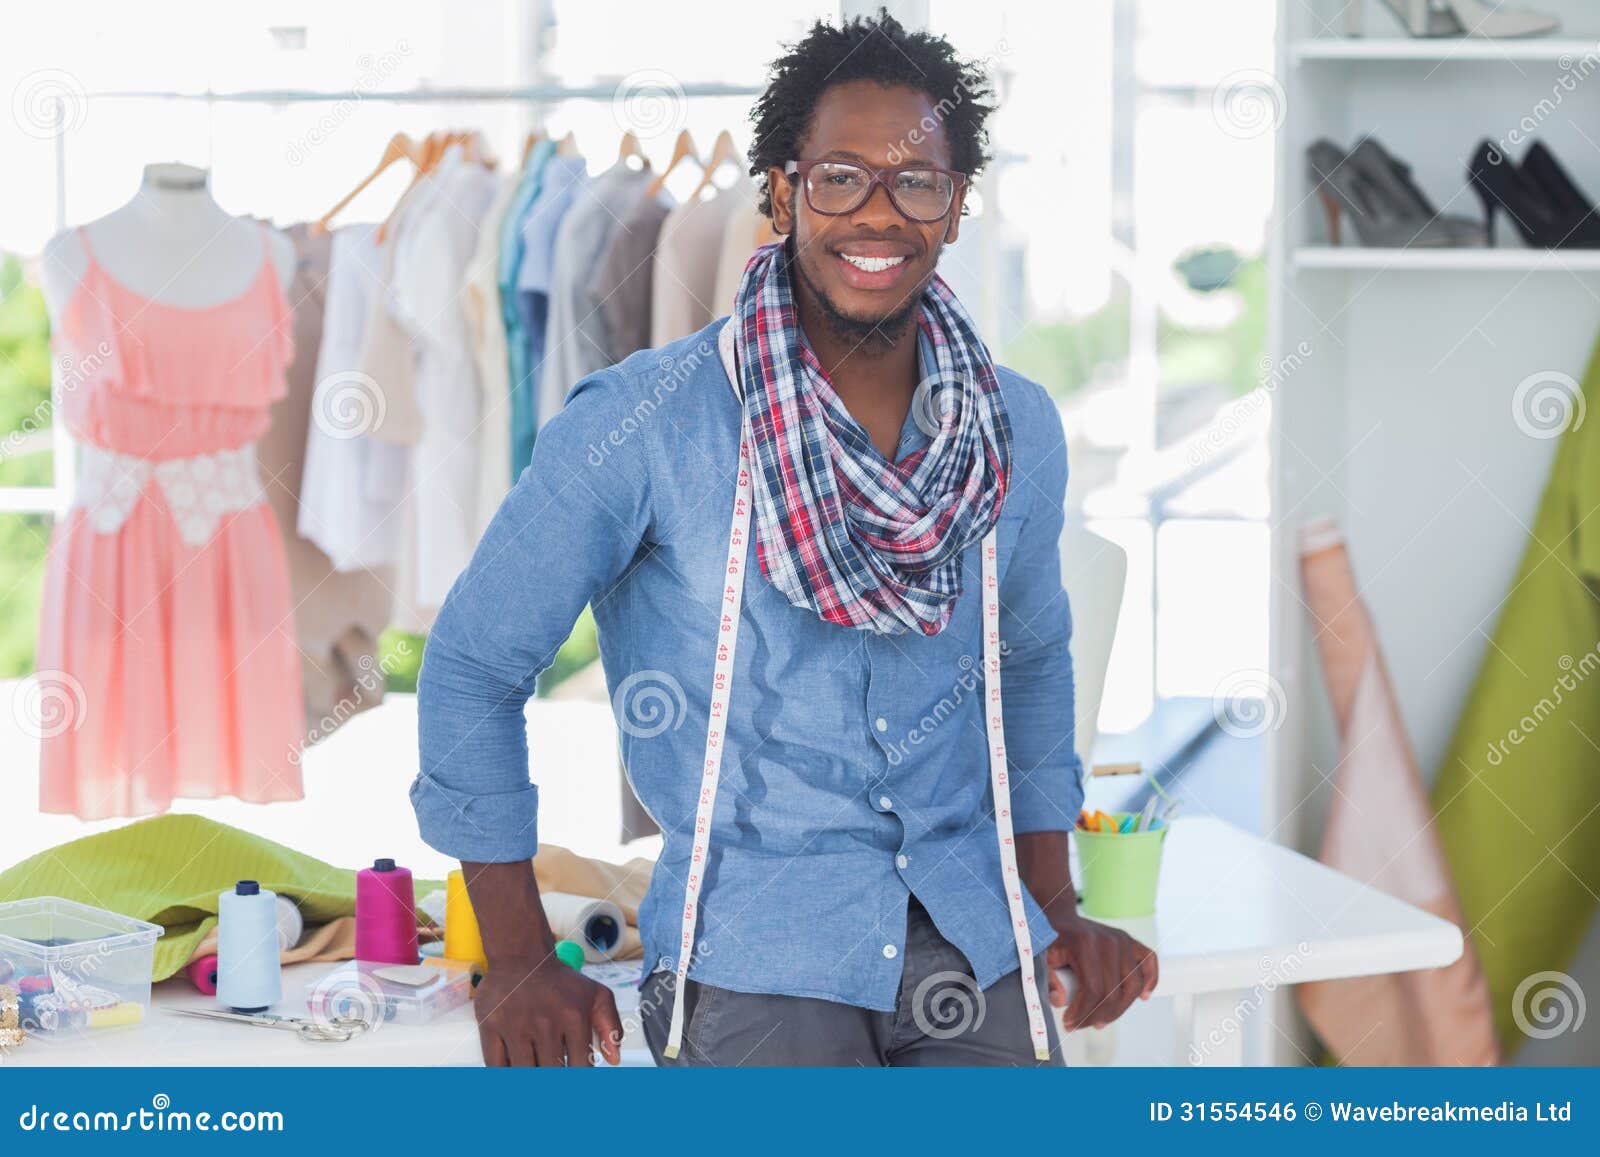 Handsome Fashion Designer Leaning on Desk Stock Photo - Image of casual ...